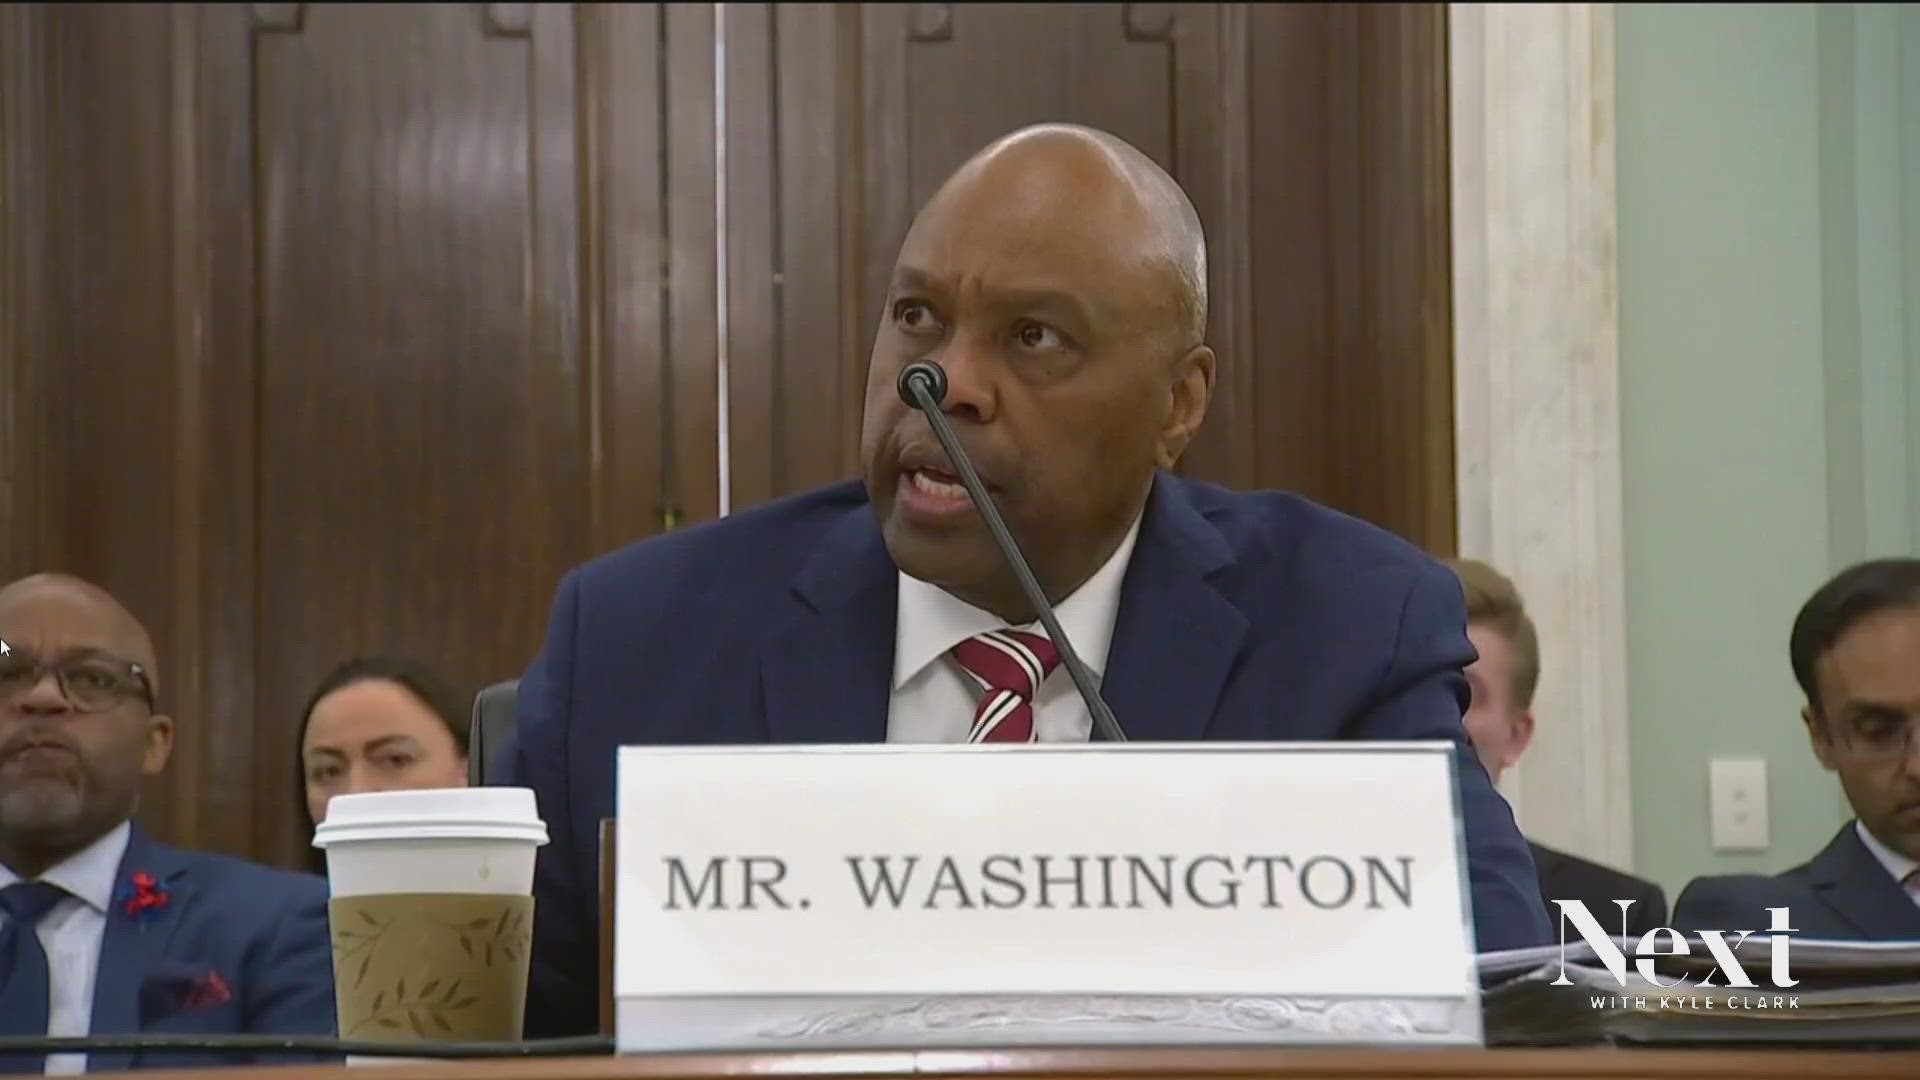 Almost eight months after President Joe Biden nominated him to lead the Federal Aviation Administration, DIA CEO Phil Washington had his confirmation hearing today.